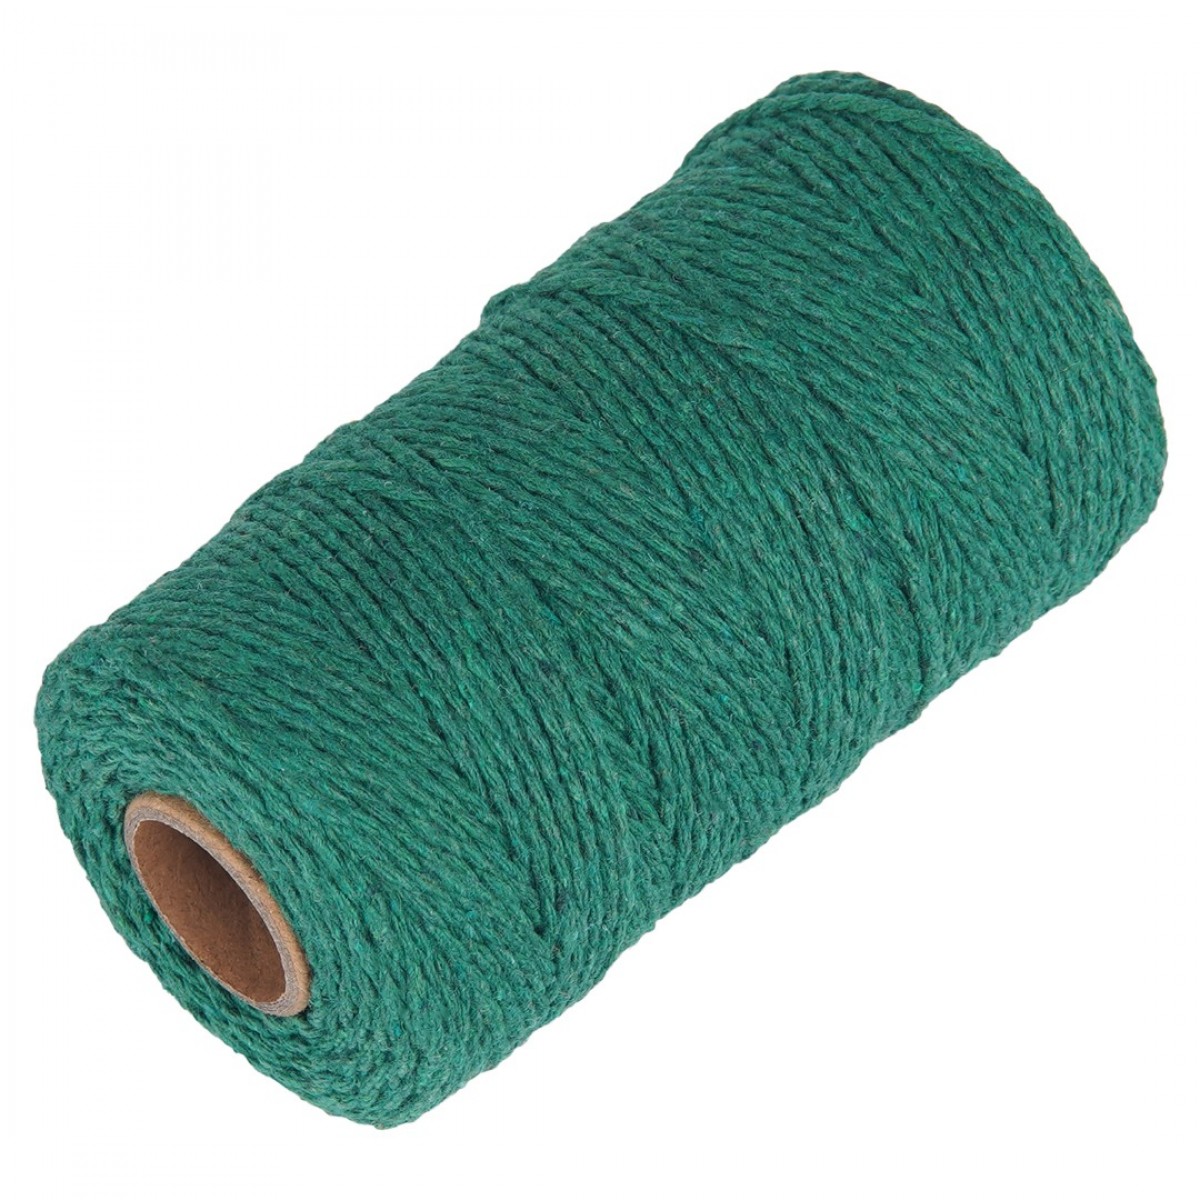 Green Garden Twine for Crafts - Ohtomber 328 Feet 2MM Natural Cotton Twine String for DIY Crafts and